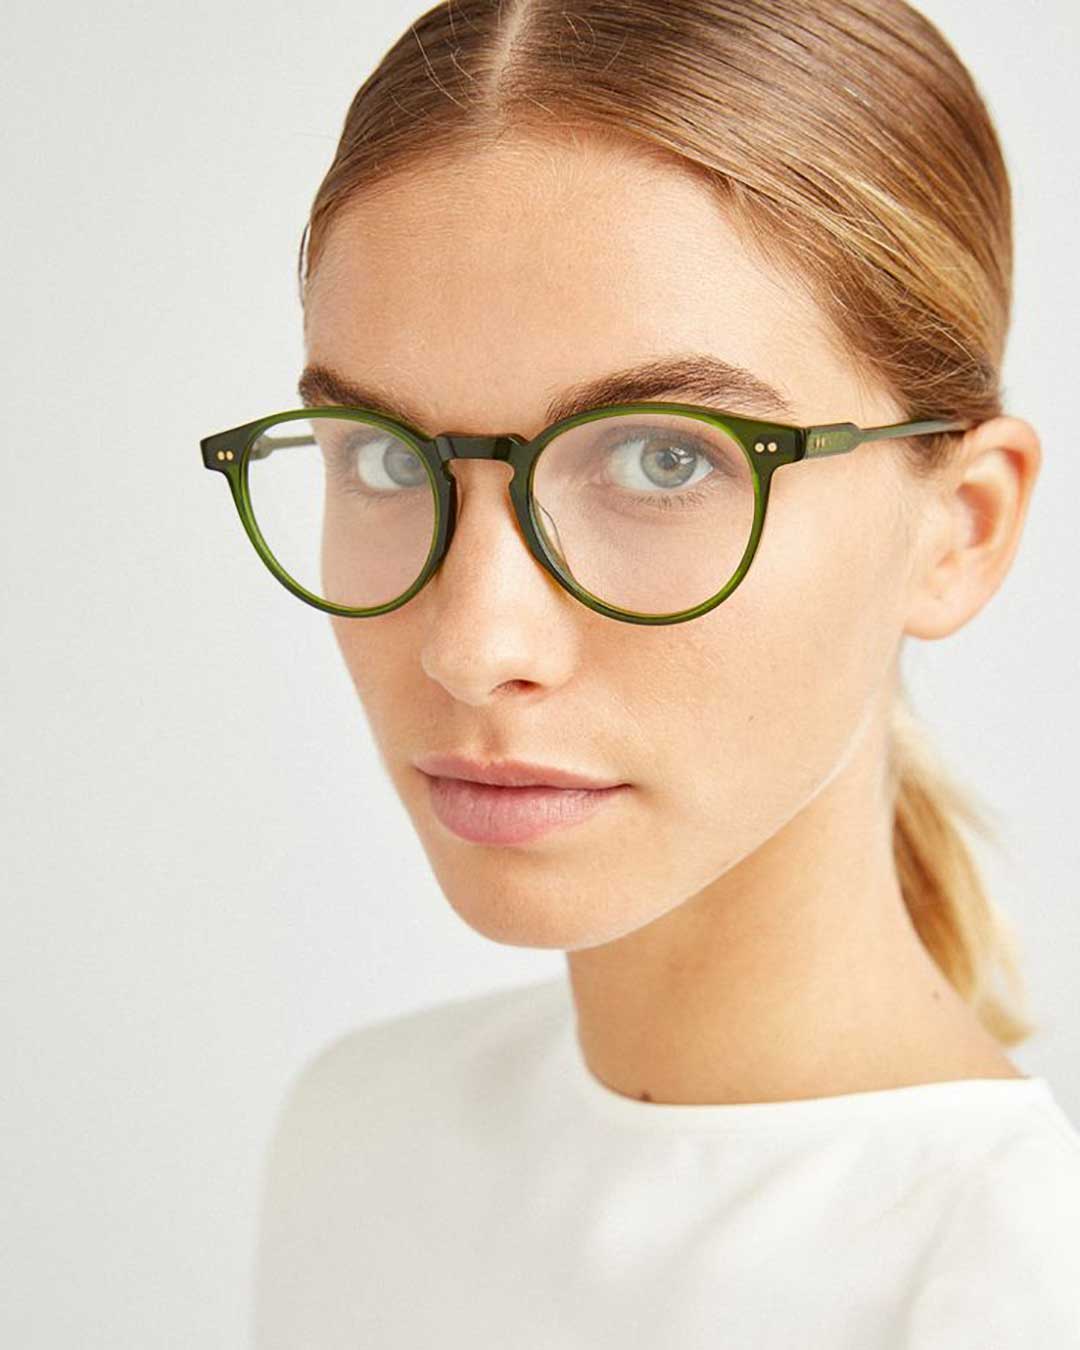 Three quarter view of young woman wearing round green eyeglasses frame and white shirt